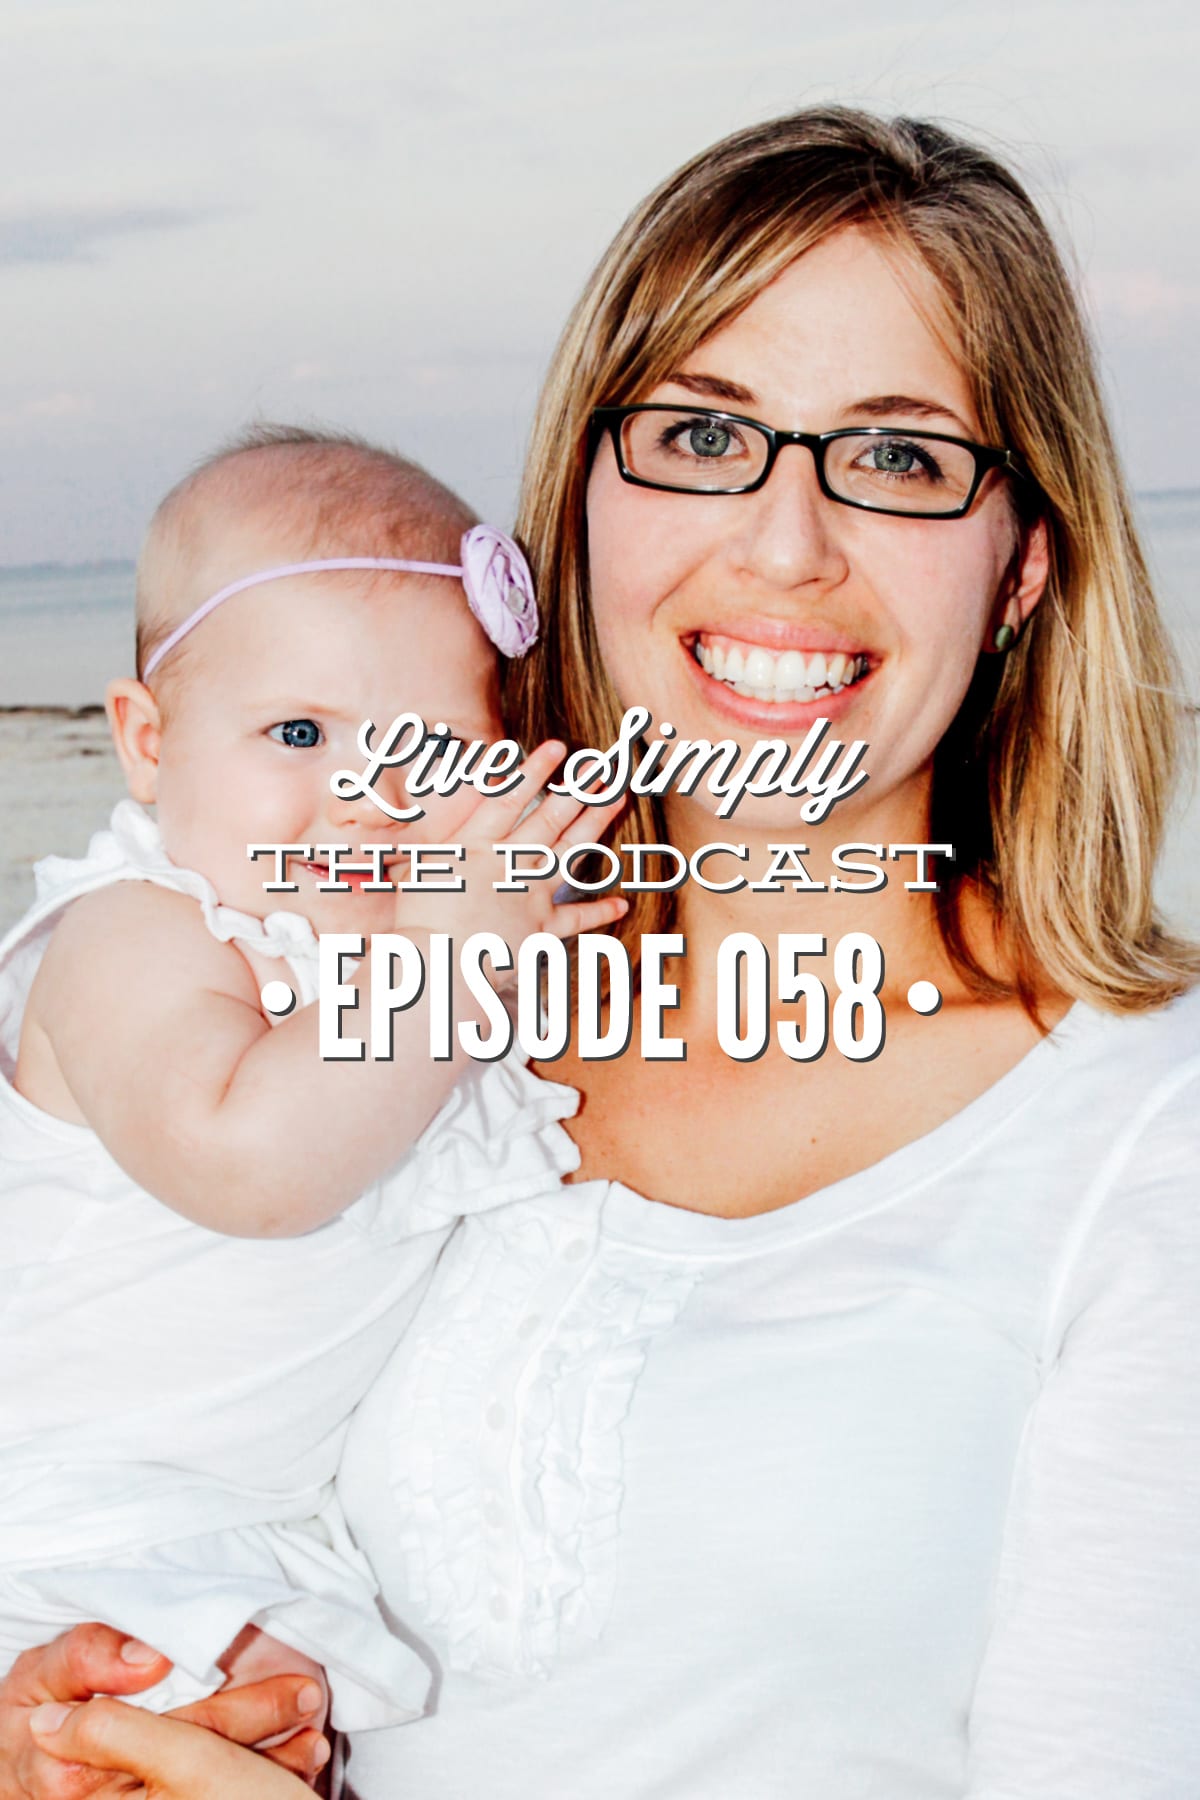 Podcast 058: Pregnancy, 4th Trimester, and Self-Care